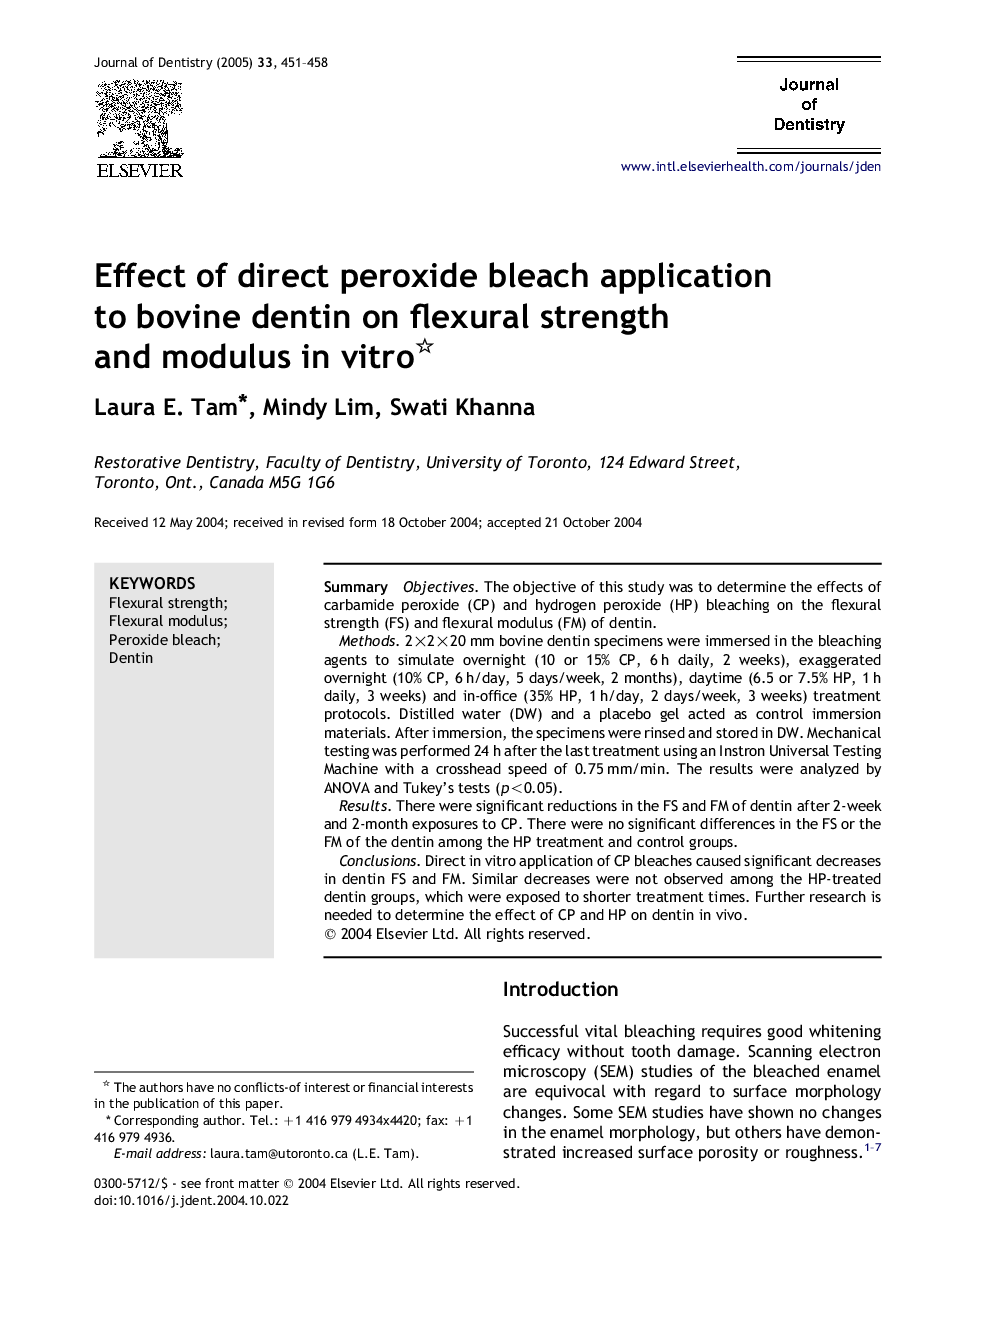 Effect of direct peroxide bleach application to bovine dentin on flexural strength and modulus in vitro